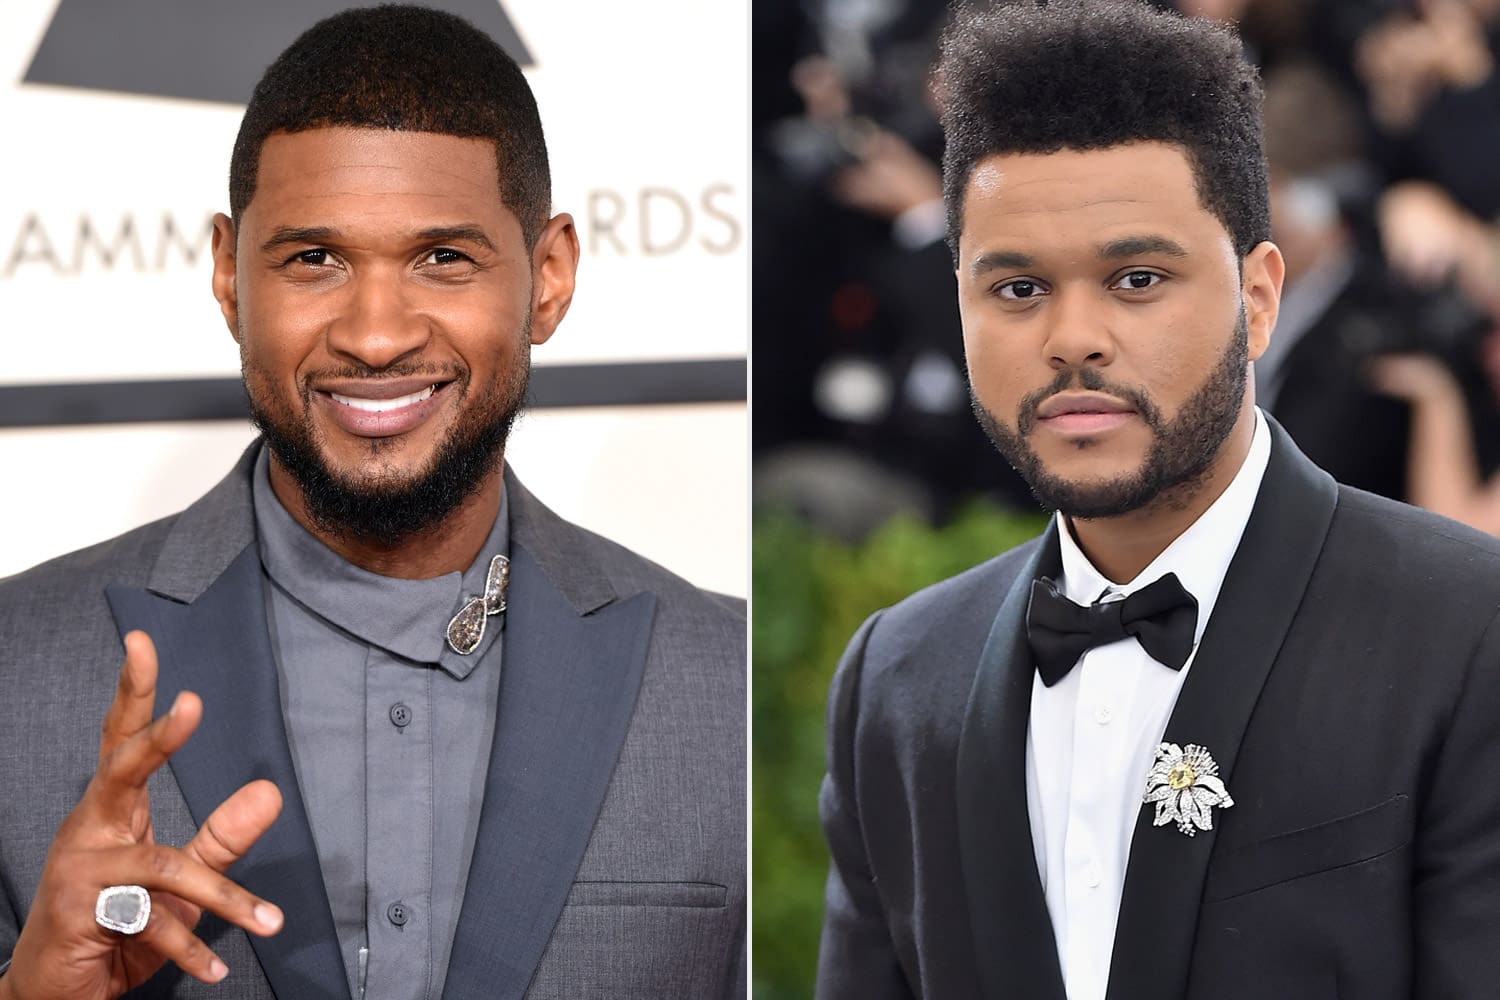 Usher and The Weeknd